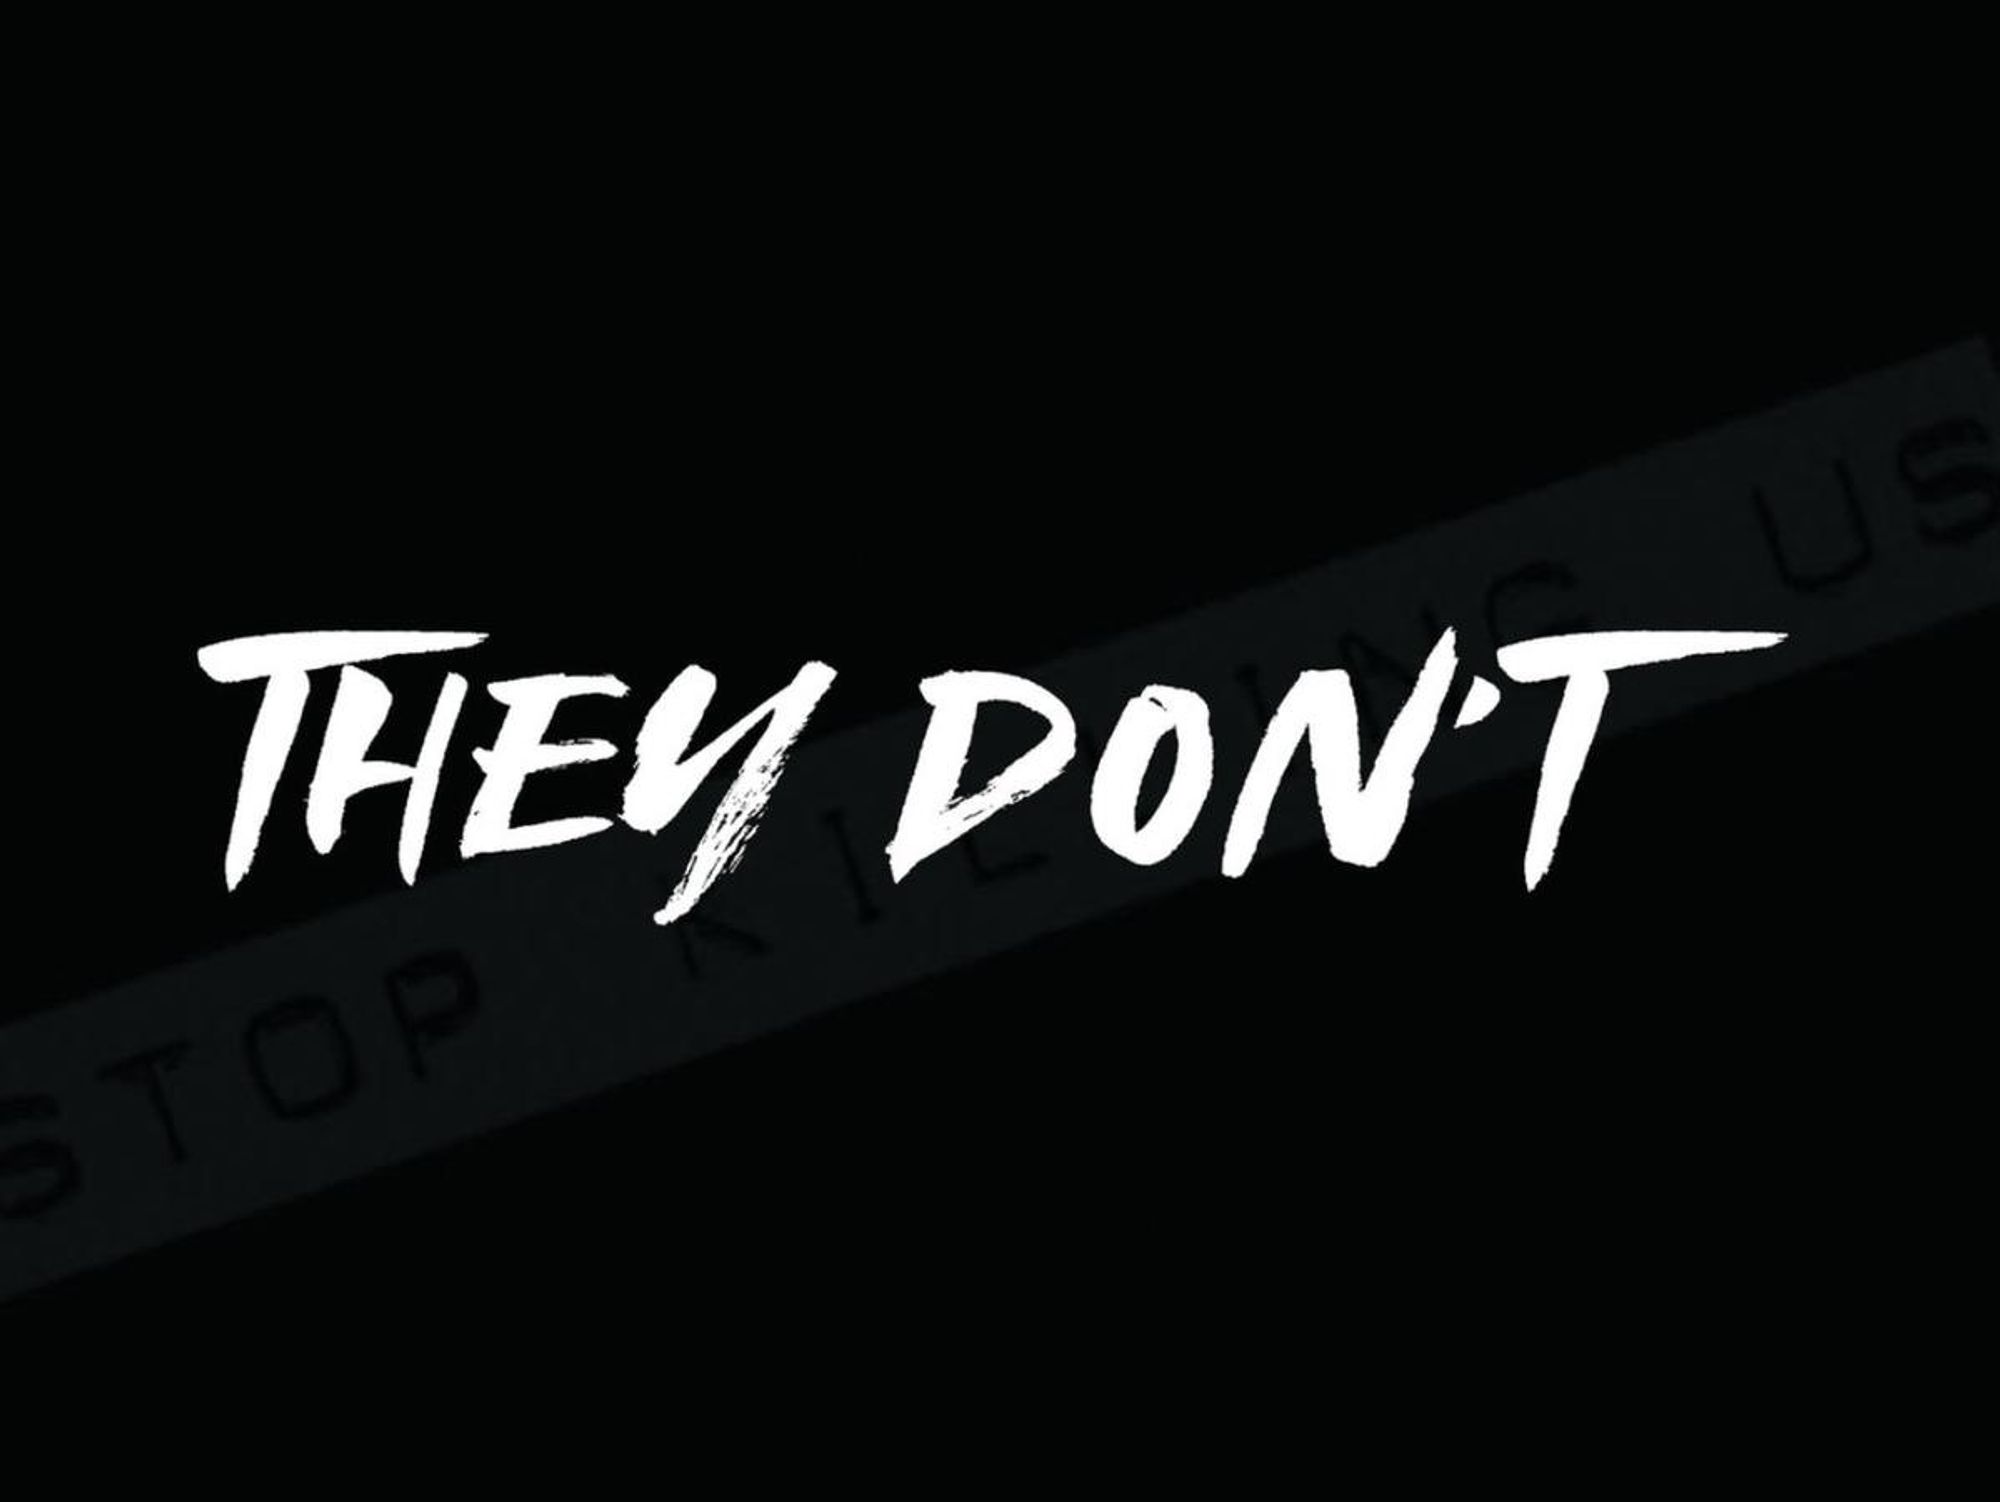 Nasty C and T.I Address Police Brutality Against Black People in New Single ‘They Don’t’